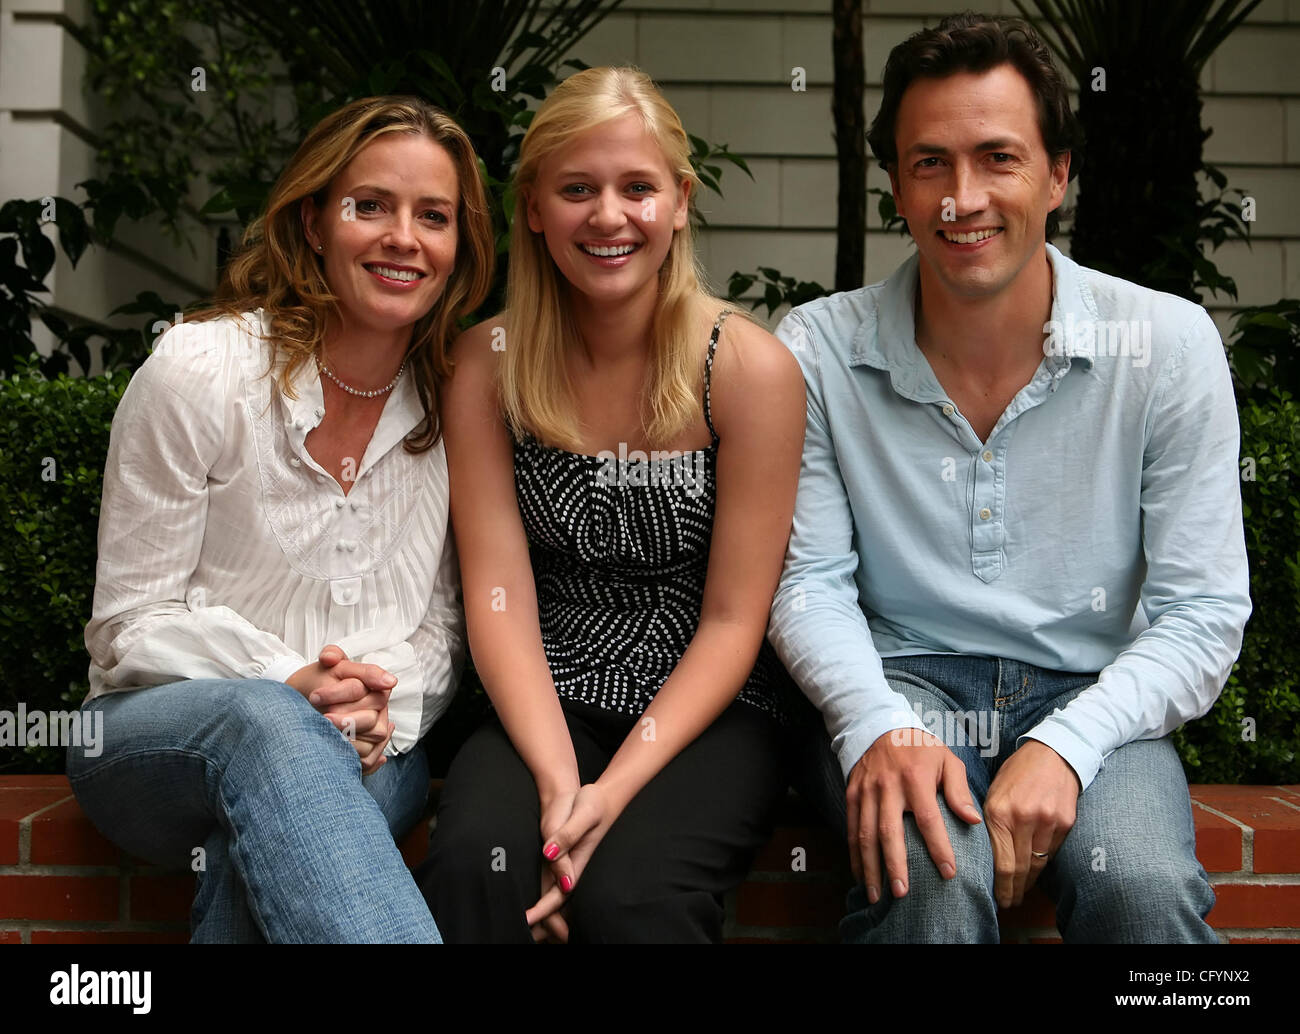 Actresses Elizabeth Shue, Carly Schroeder, age 16, and actor Andrew Shue are photographed at the Ritz Carlton on Friday, May 25, 2007 in San Francisco, Calif. Schroder is a new movie called 'Gracie', opening June 1st. The movie is inspired by events in the life of Elisabeth Shue while growing up. (J Stock Photo